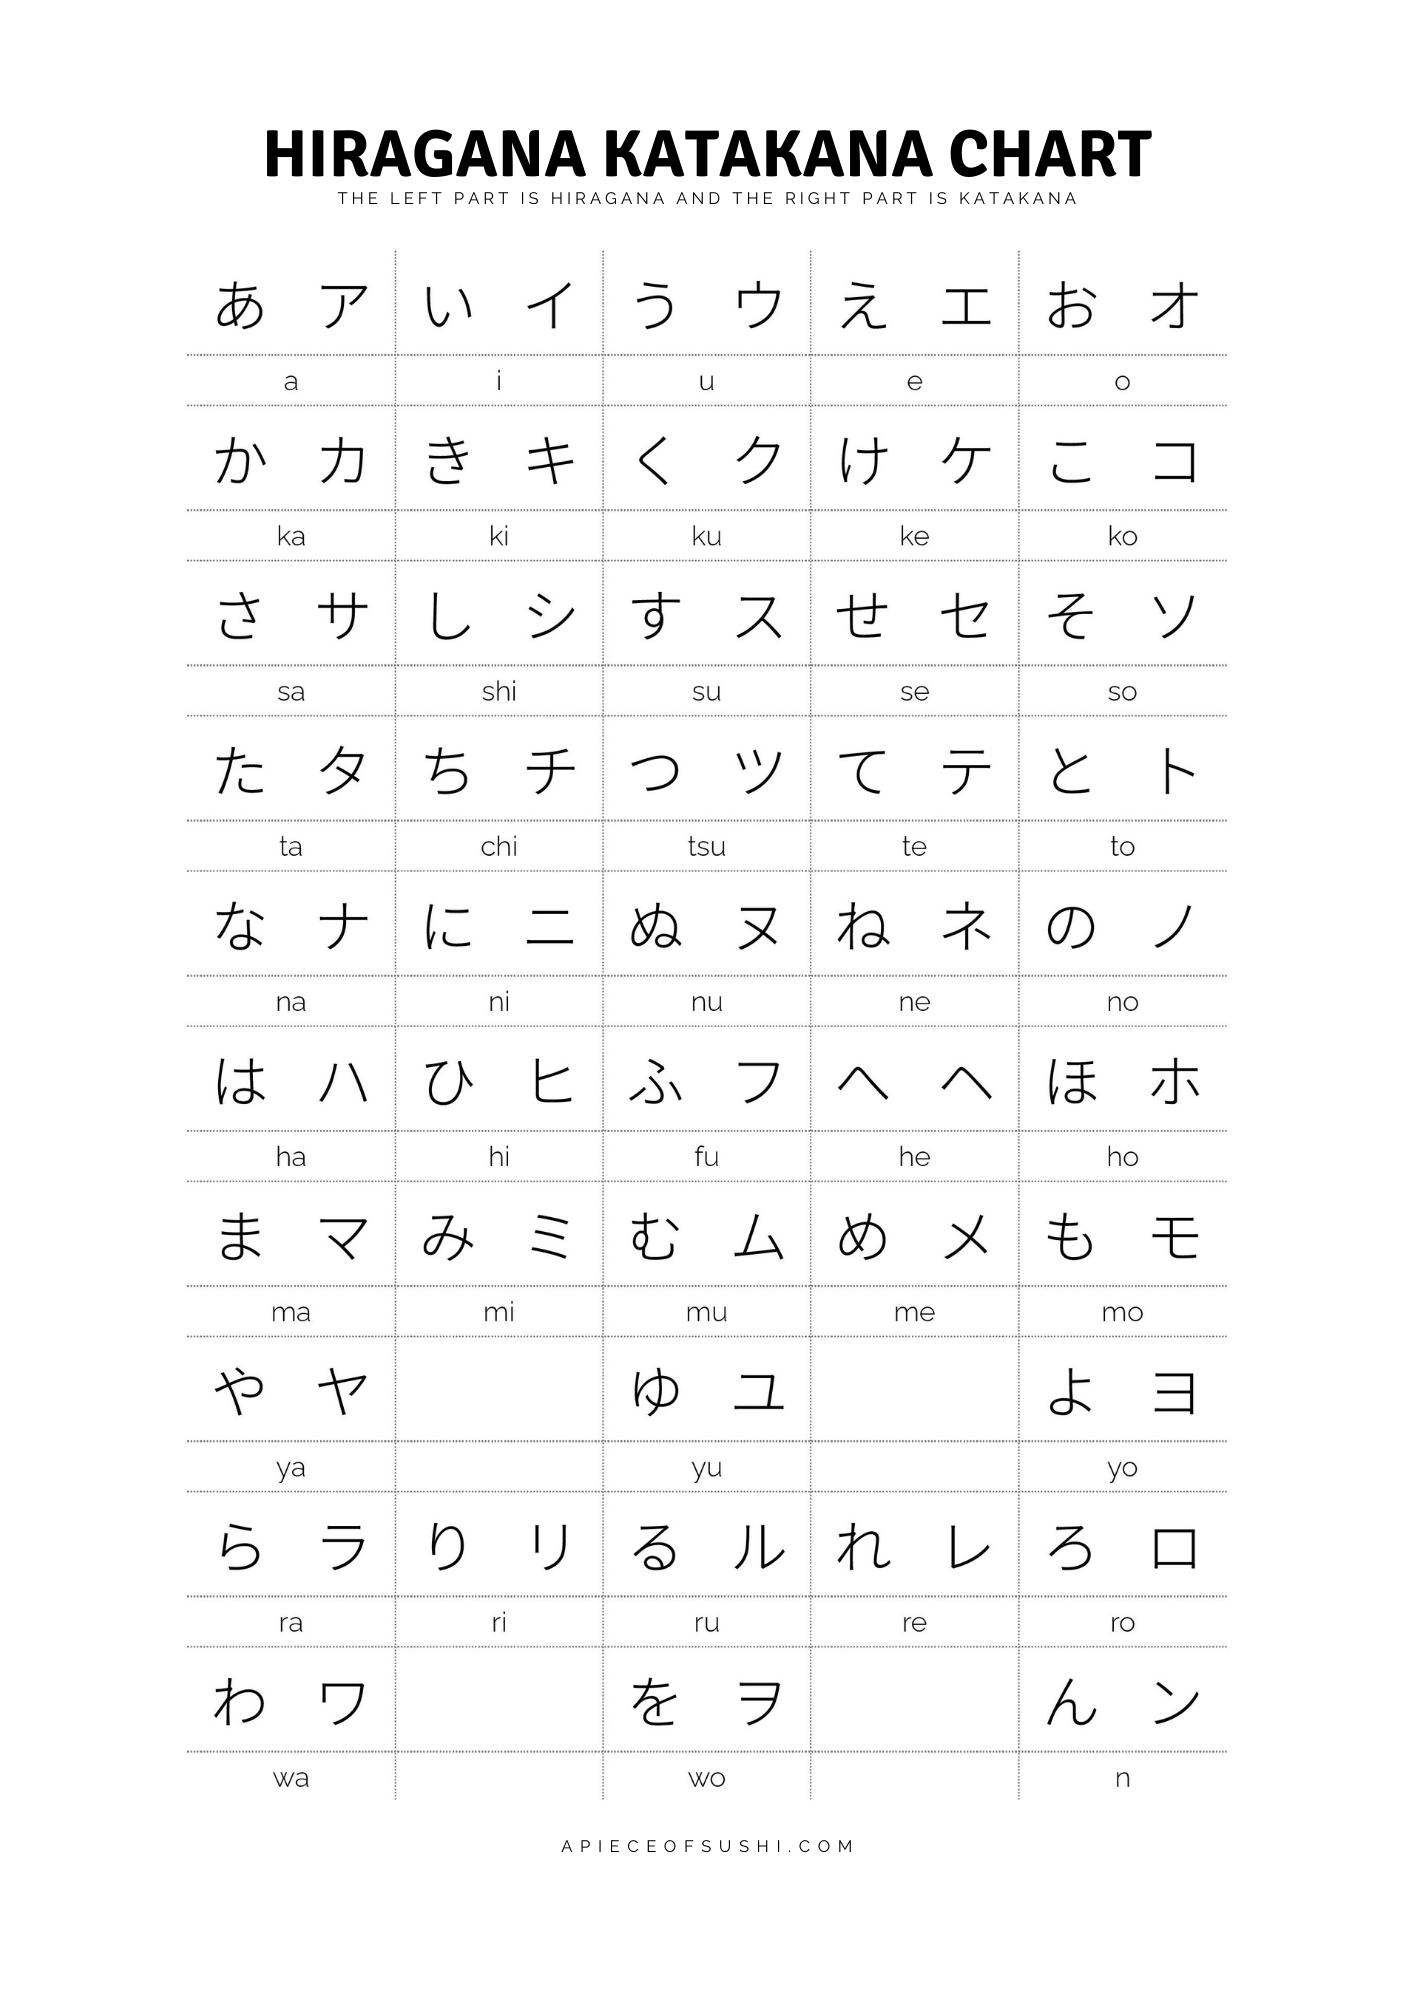 Hiragana Katakana Chart Free Download Printable Pdf With 3 Different Colours ひらがな カタカナ表 A Piece Of Sushi